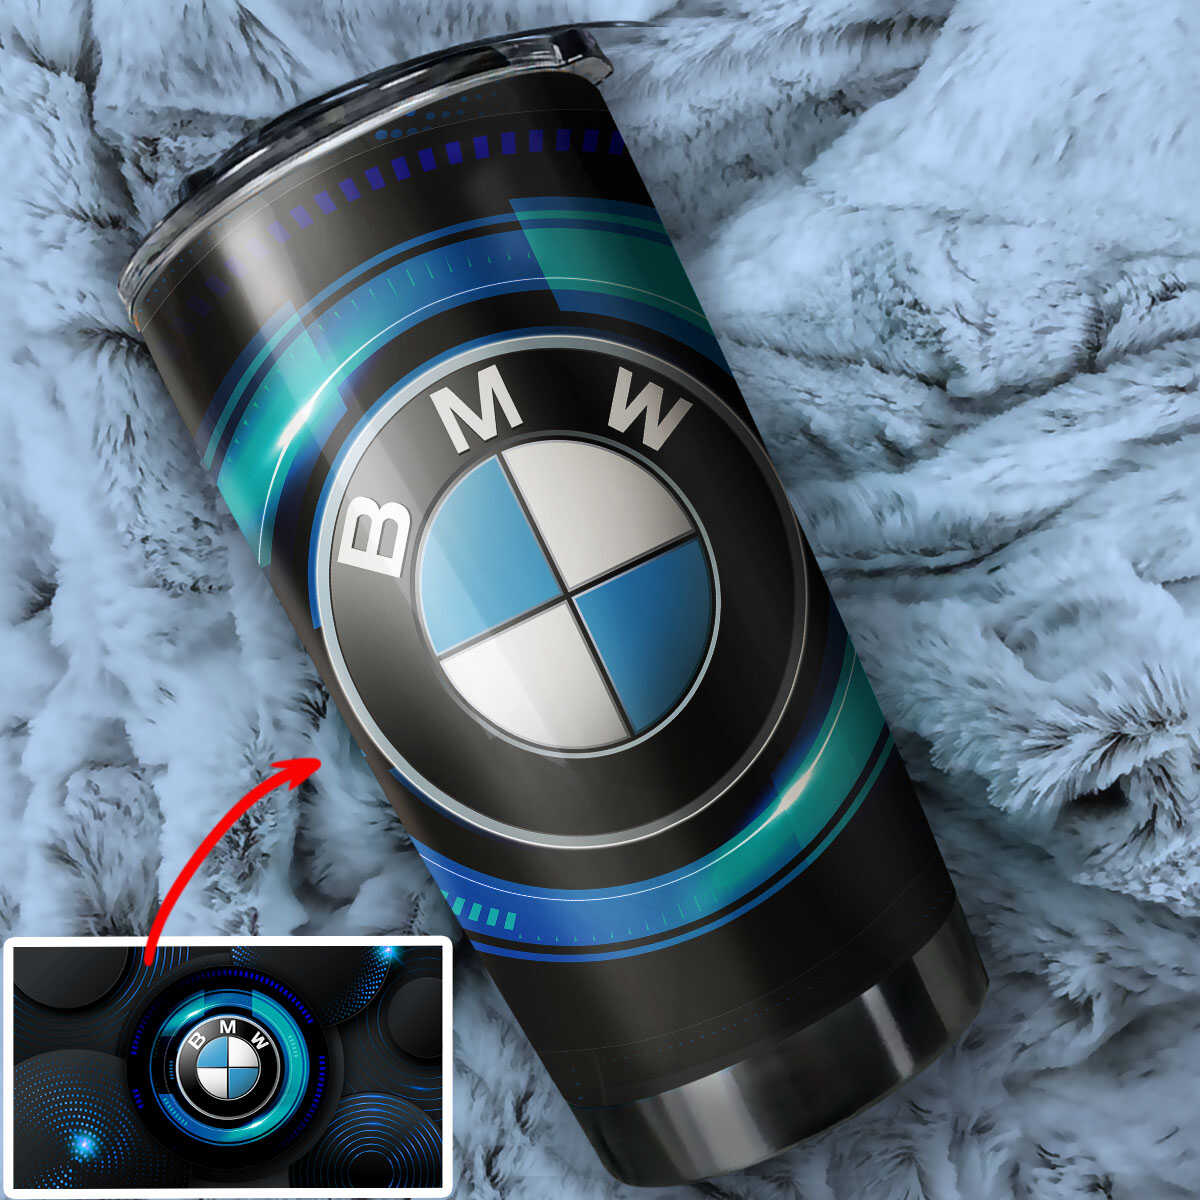 Personalized Car Tumbler - Stainless Steel Tumbler For Car Enthusiasts -  TrendySweety